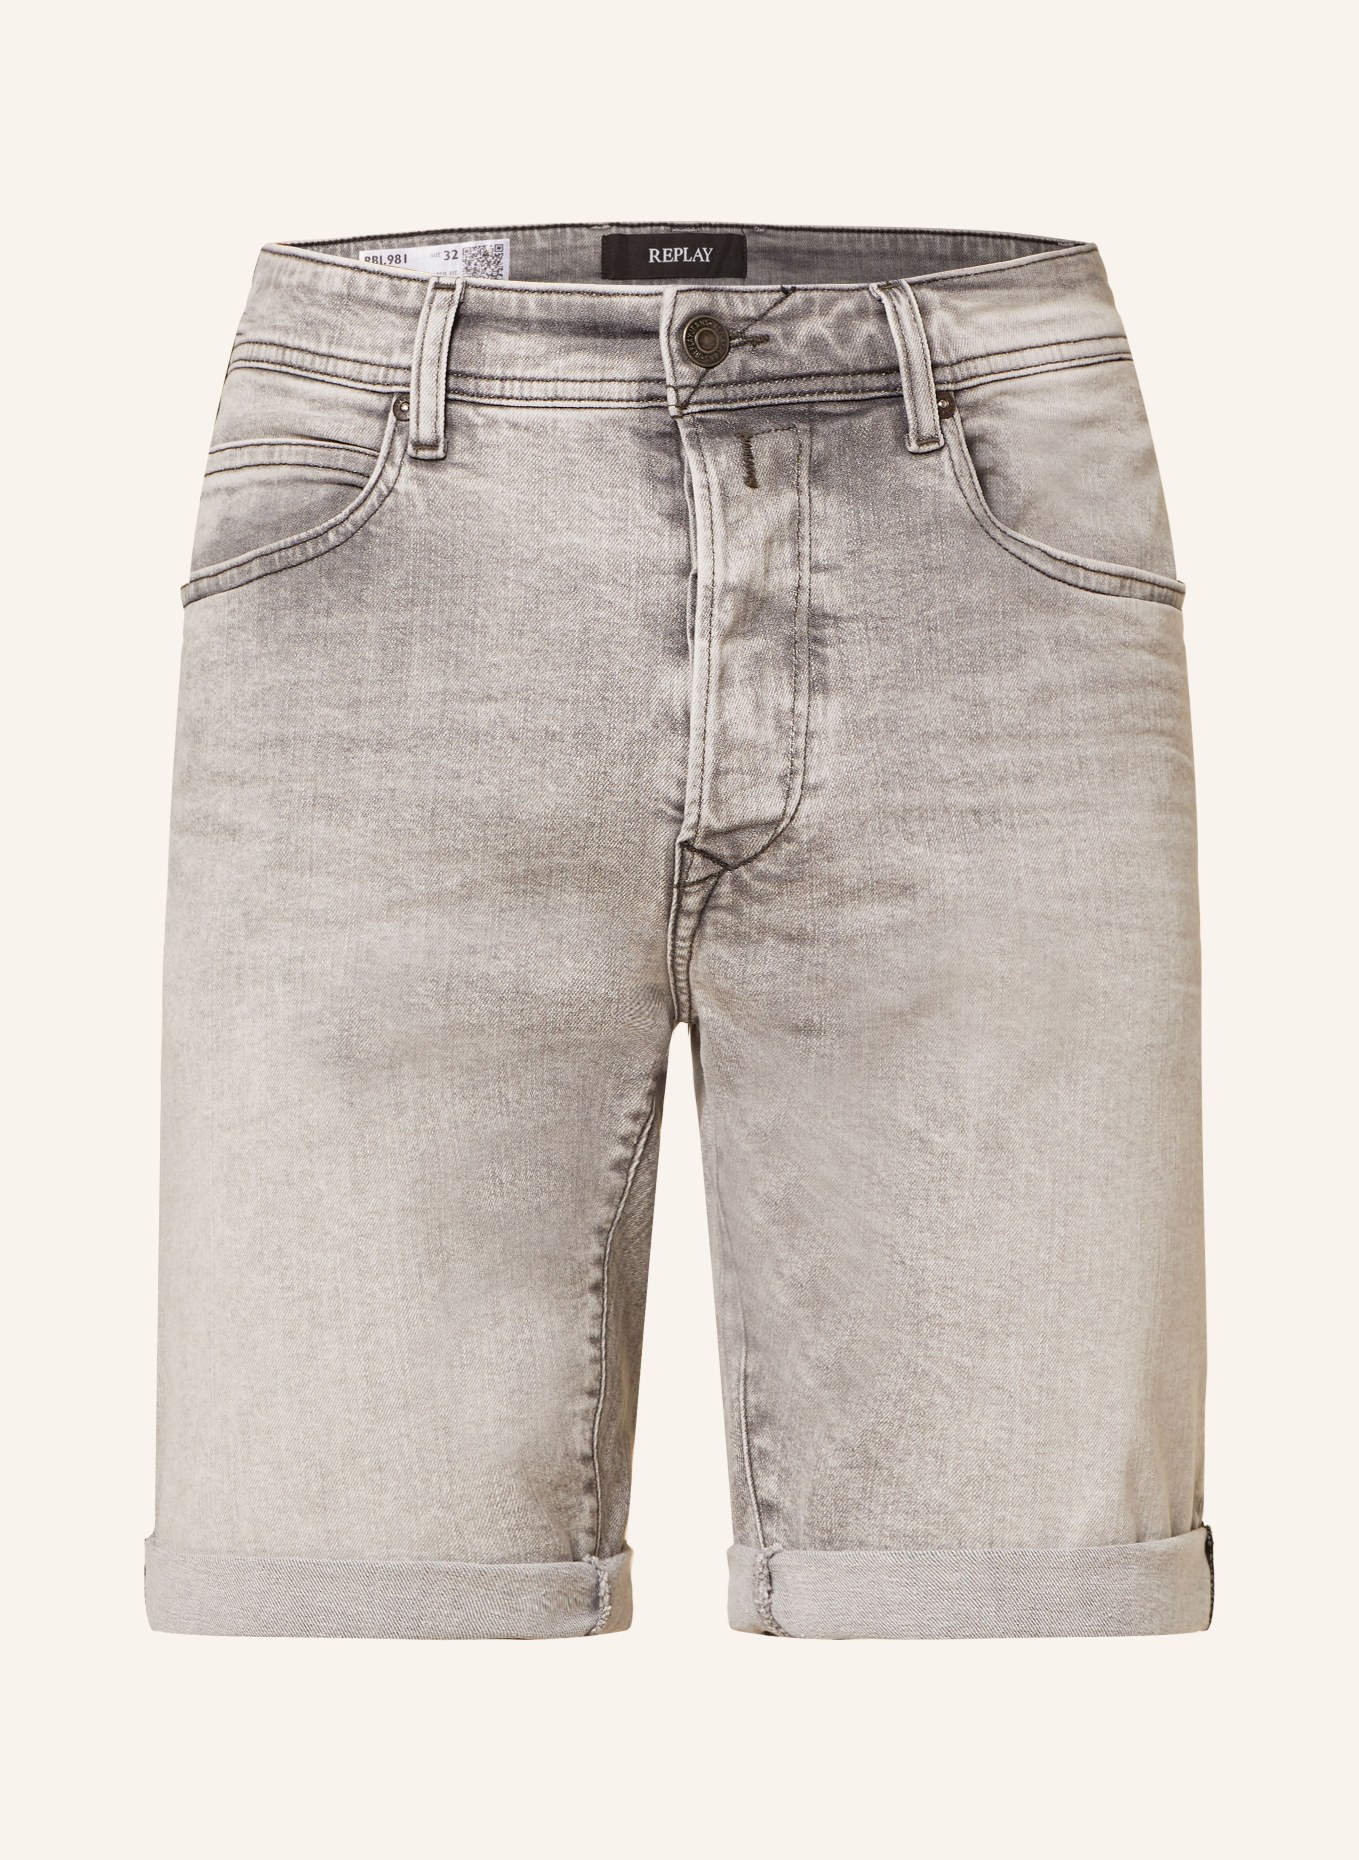 REPLAY Denim shorts 573 tapered fit, Color: 095 light grey (Image 1)